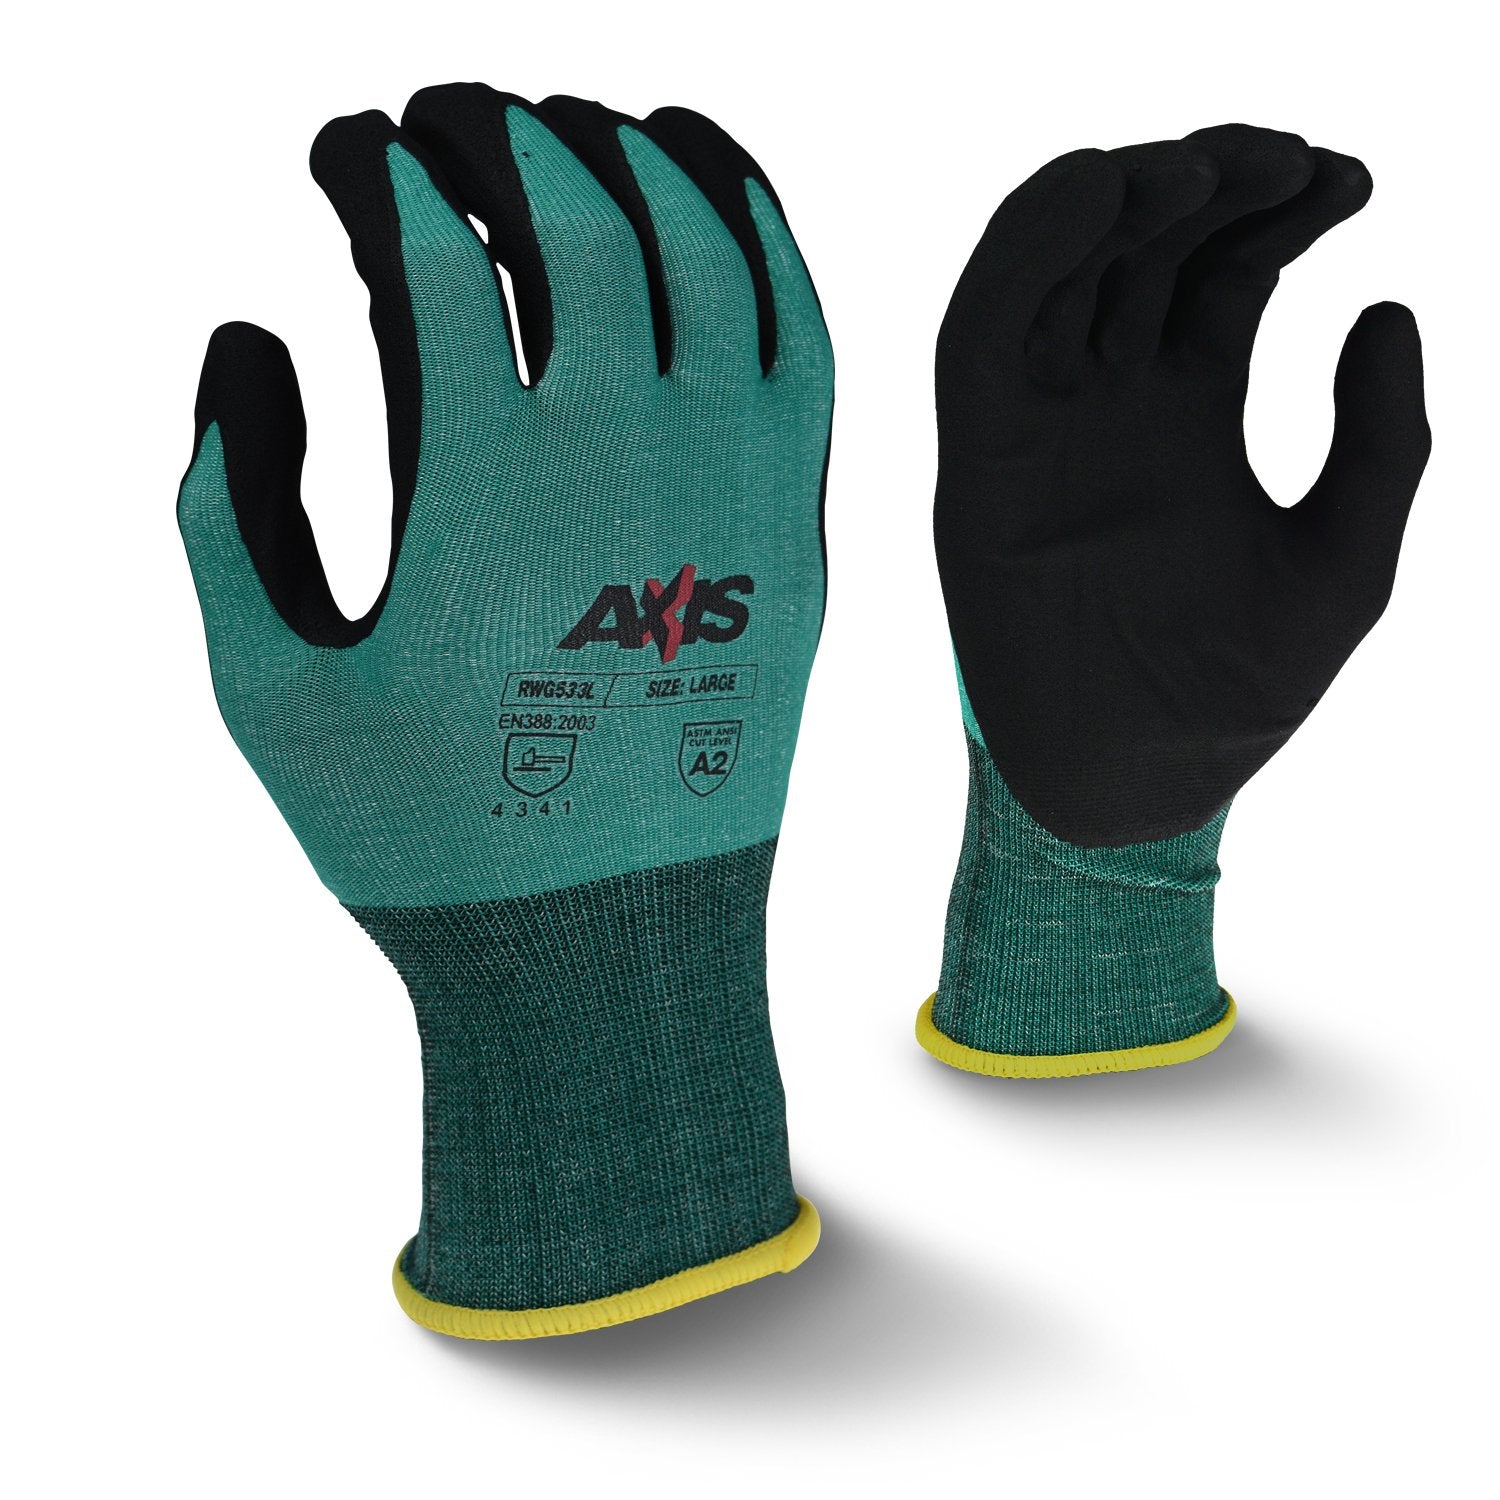 2X-Large Axis Cut Protection Level 2 Nitrile Coated Glove